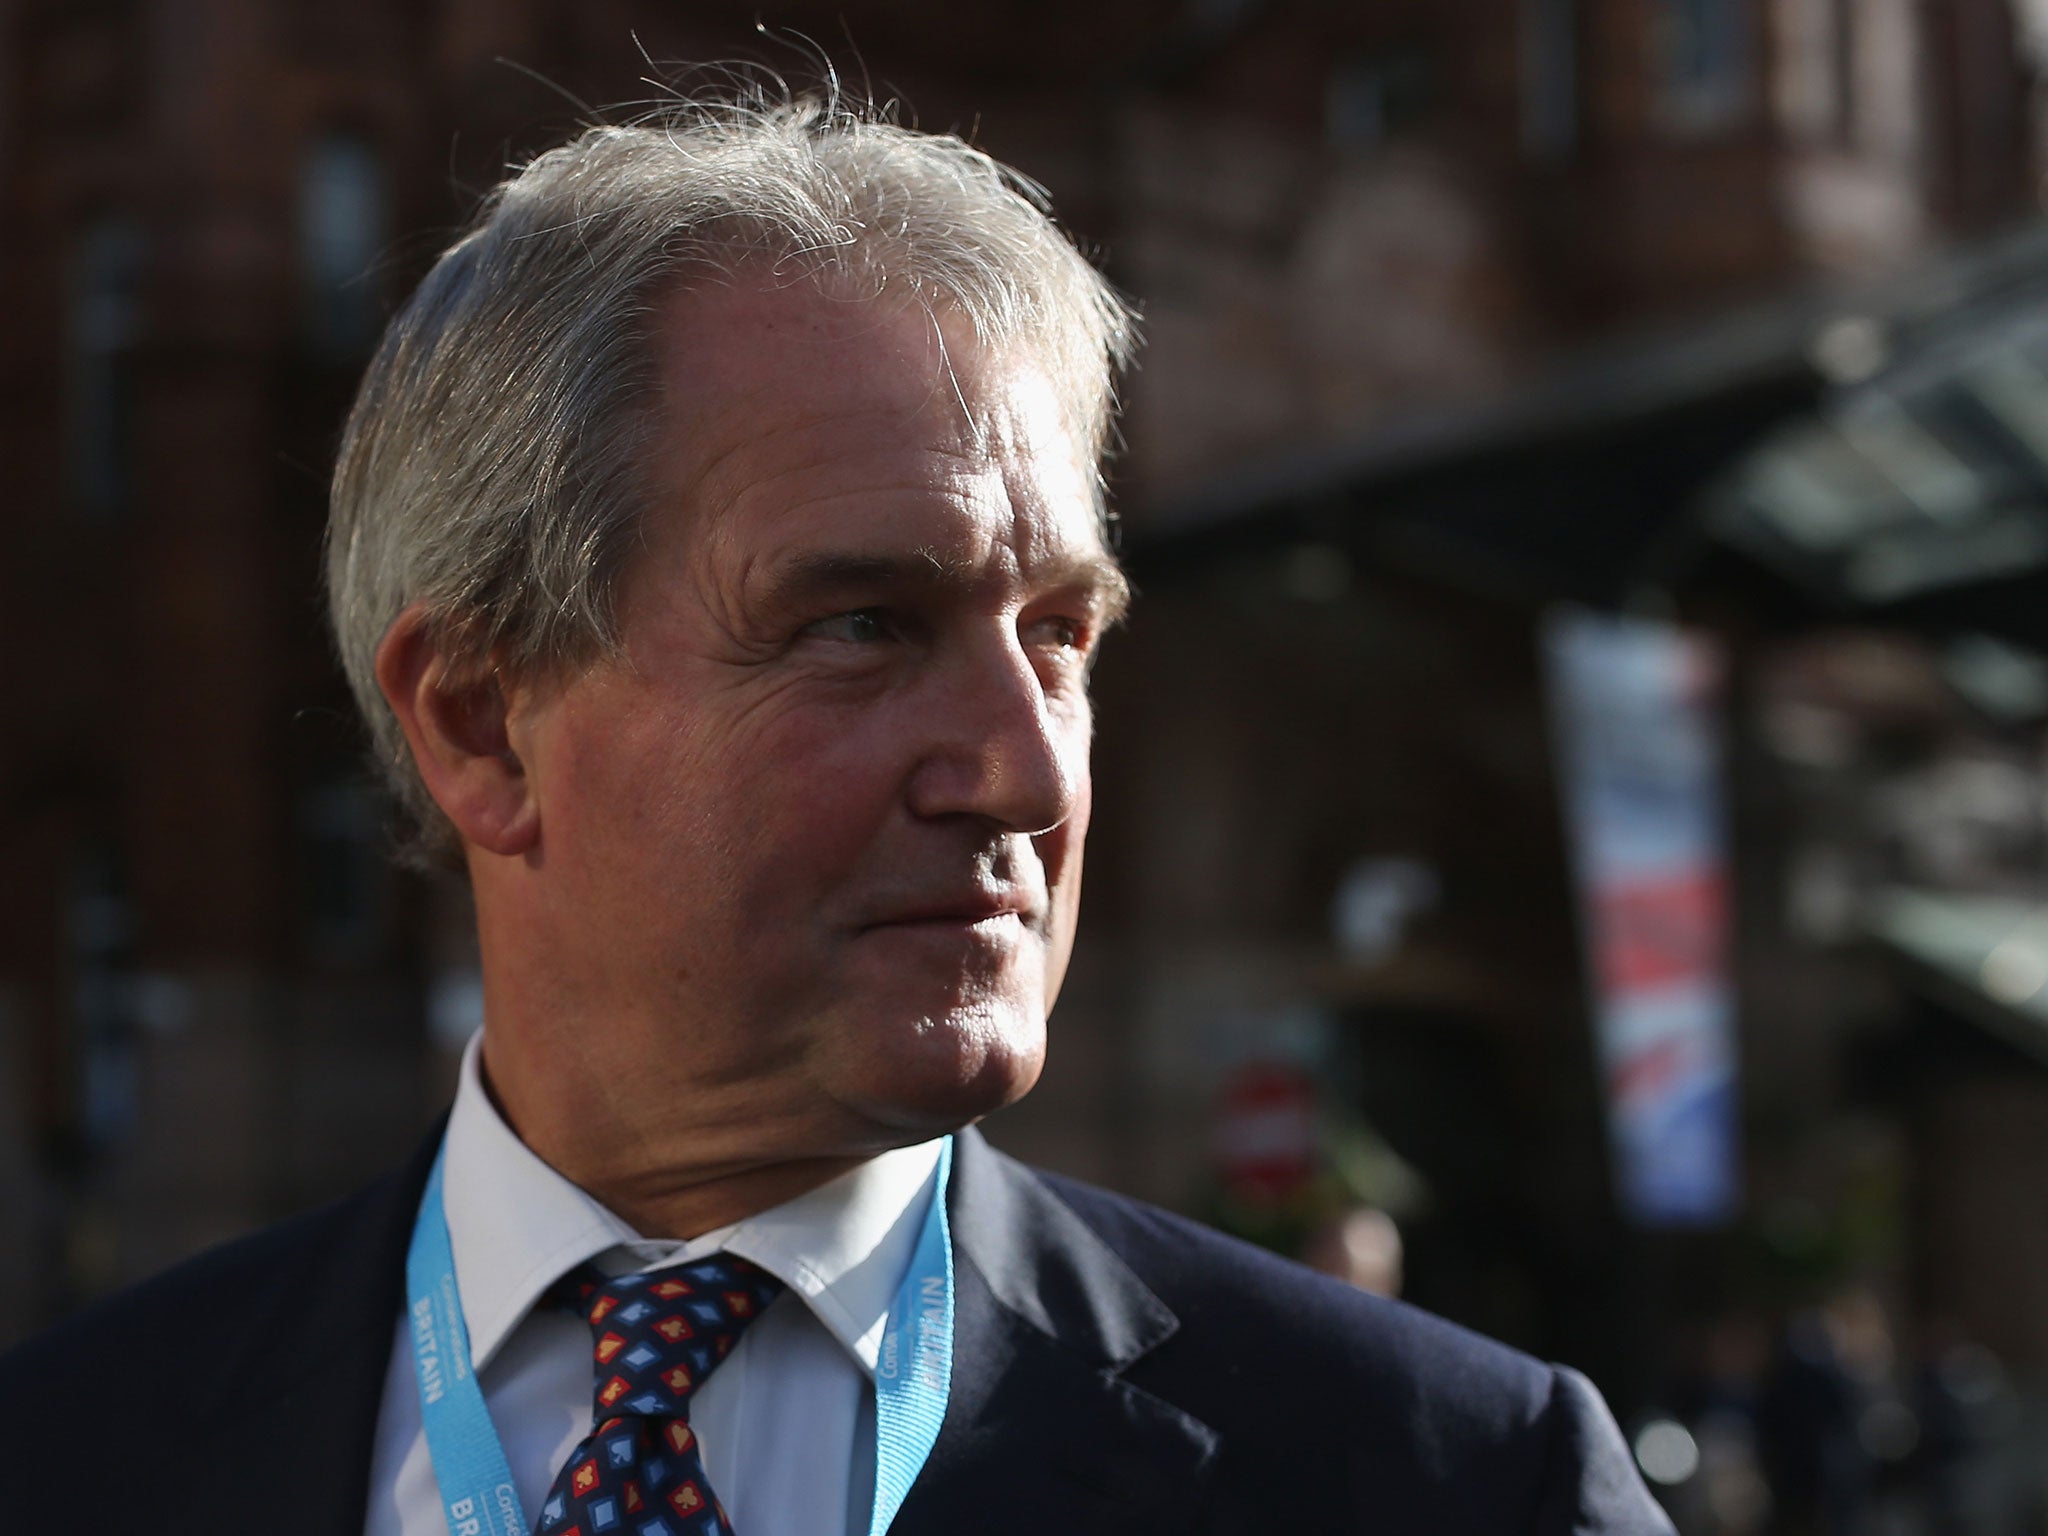 Former Northern Ireland Secretary Owen Paterson said there could be a 'debate' on shortening the legal abortion time limit